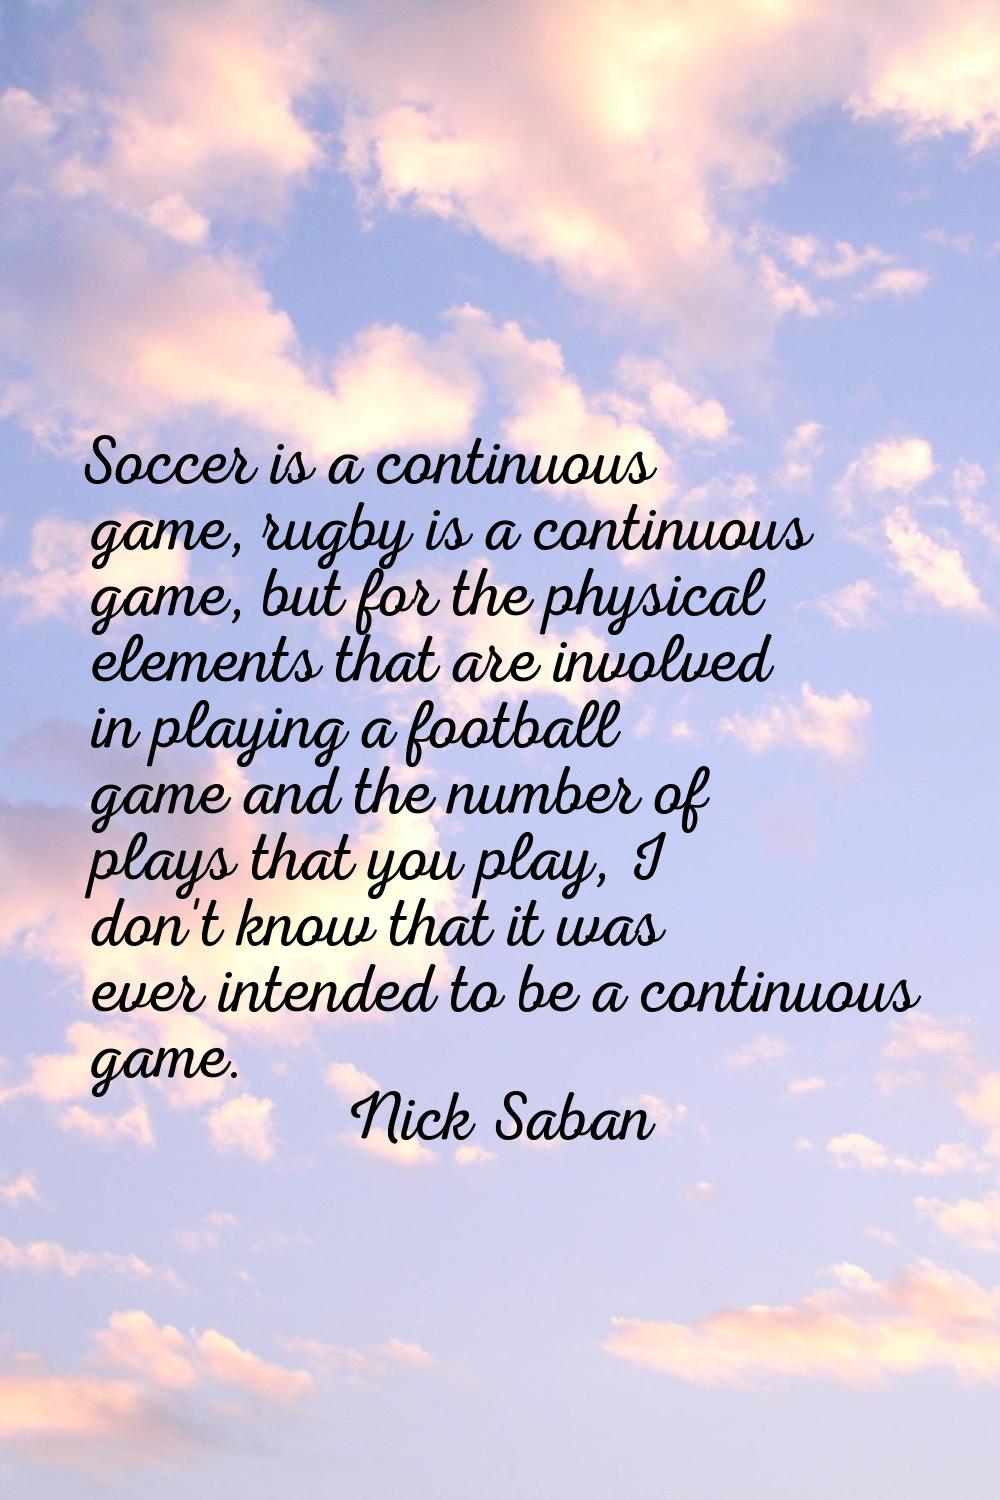 Soccer is a continuous game, rugby is a continuous game, but for the physical elements that are inv